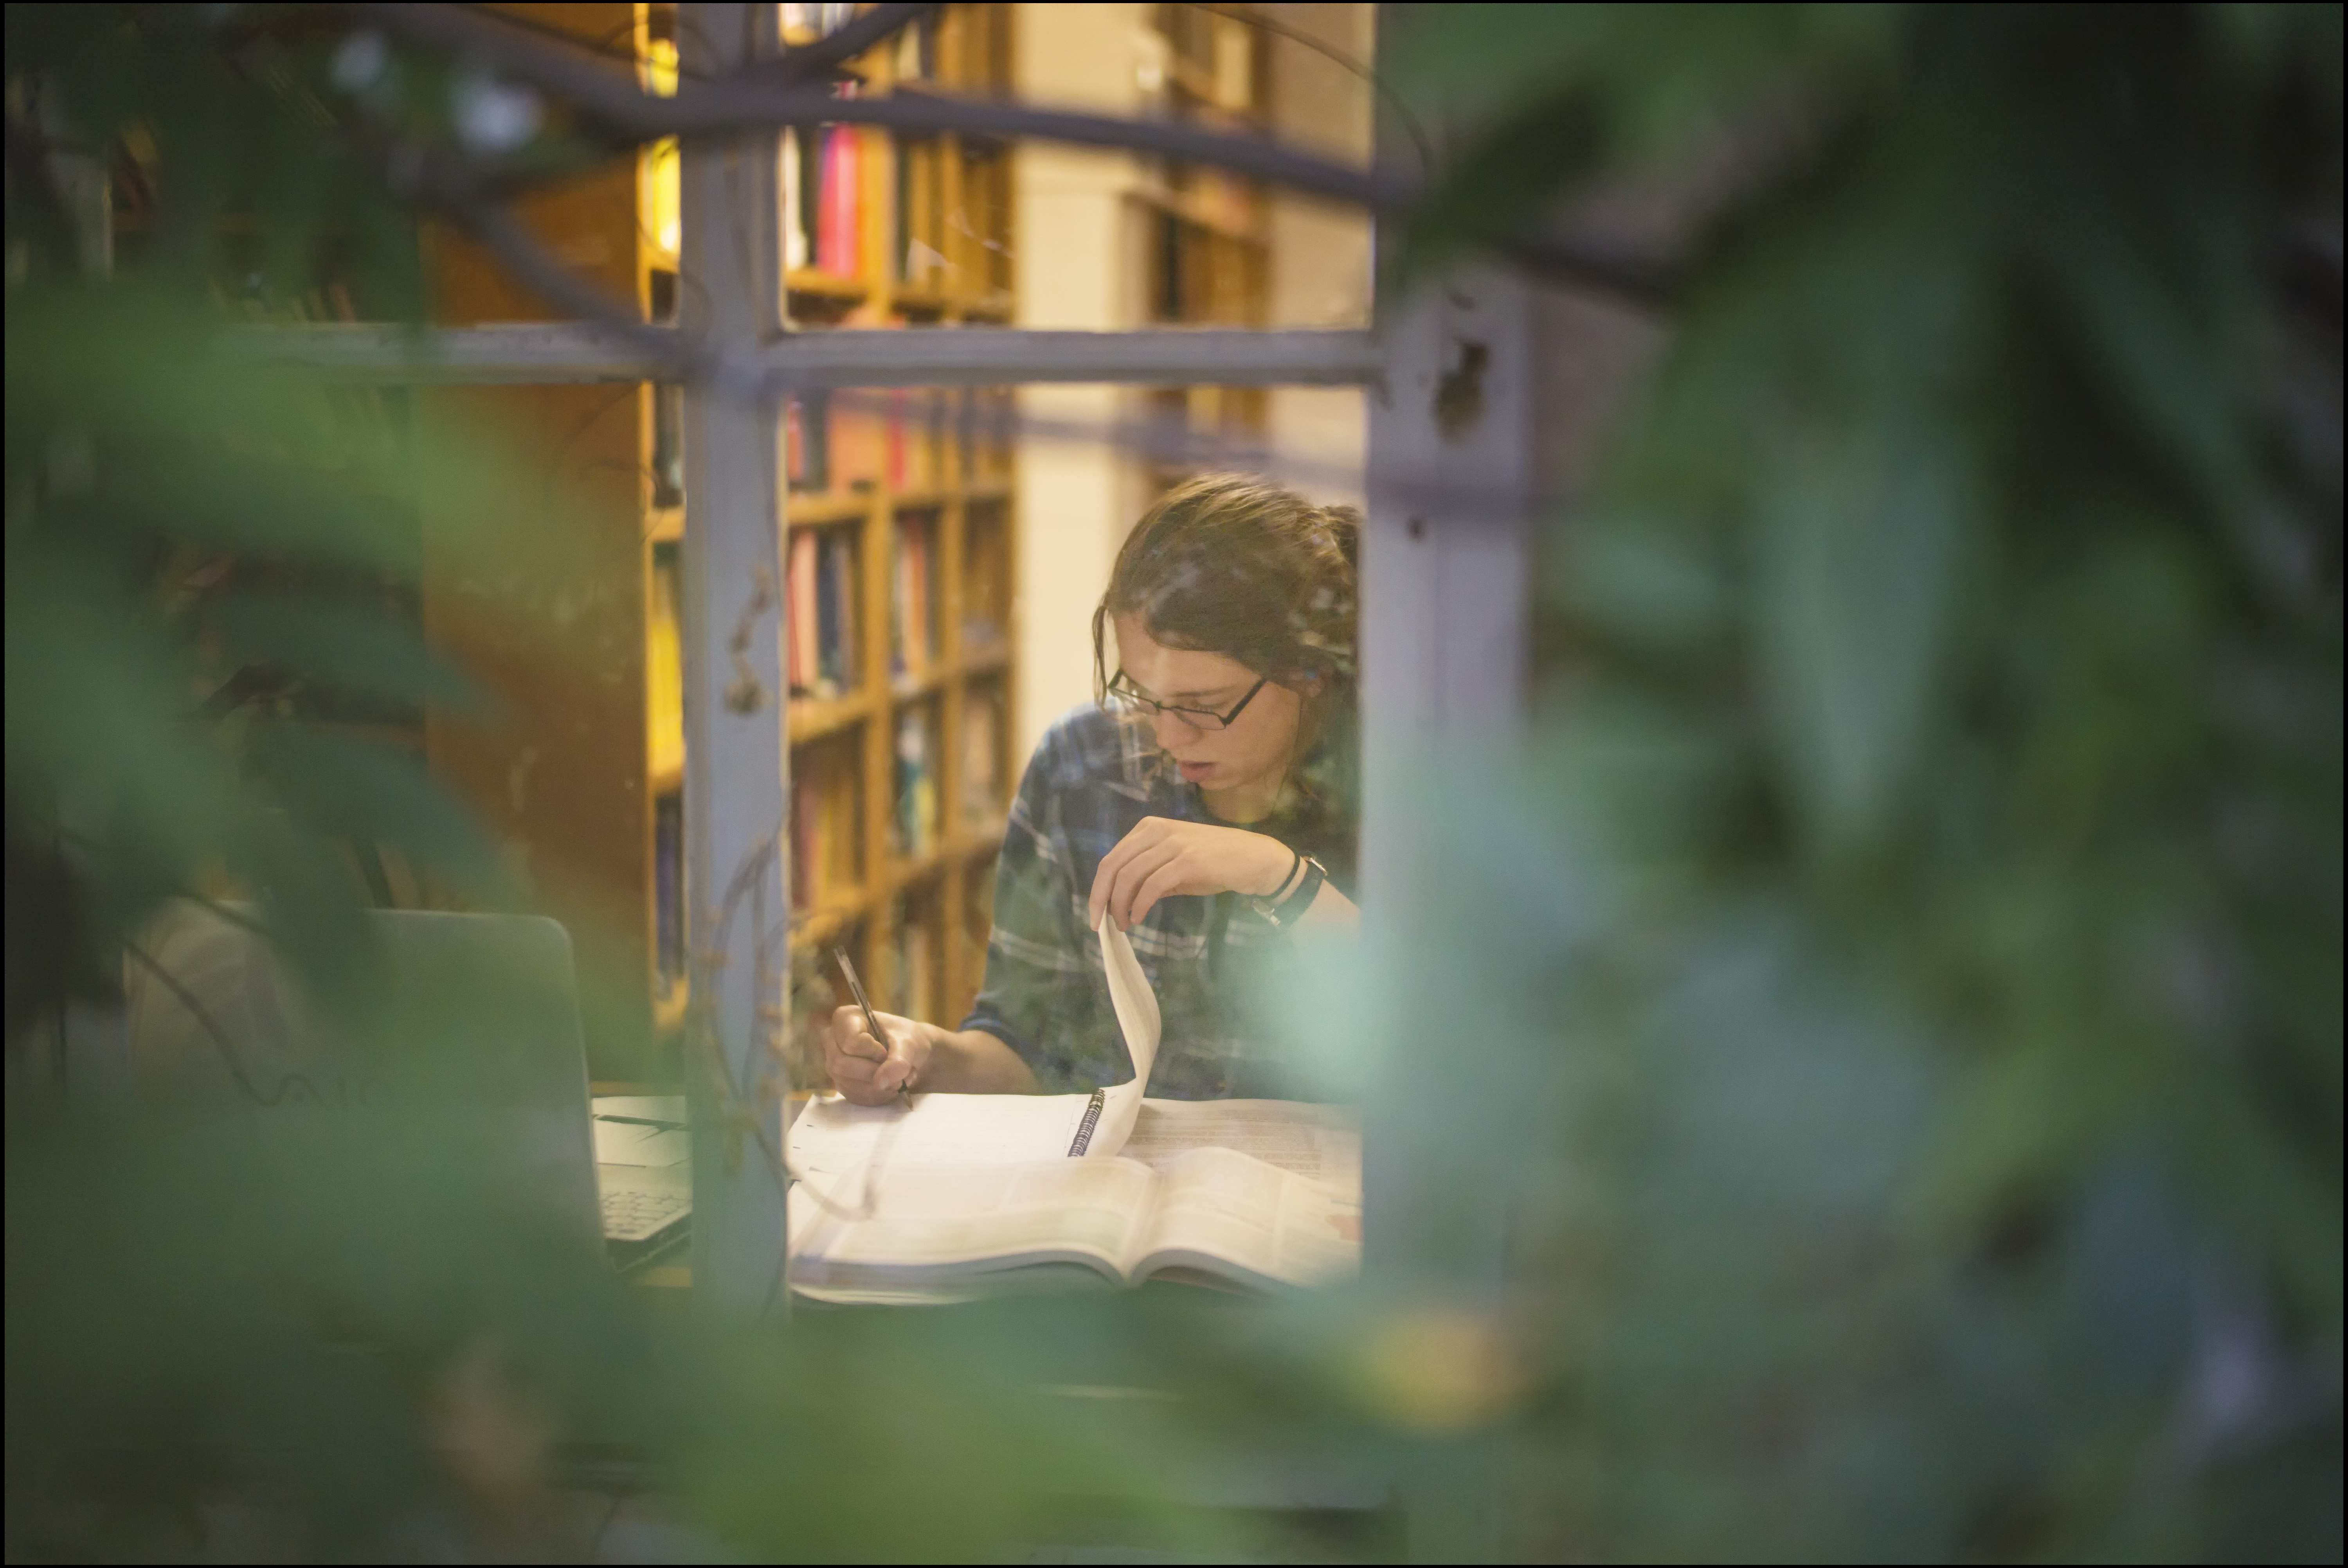 Photo of student studying in the LMH Library window taken through a tree from a distance